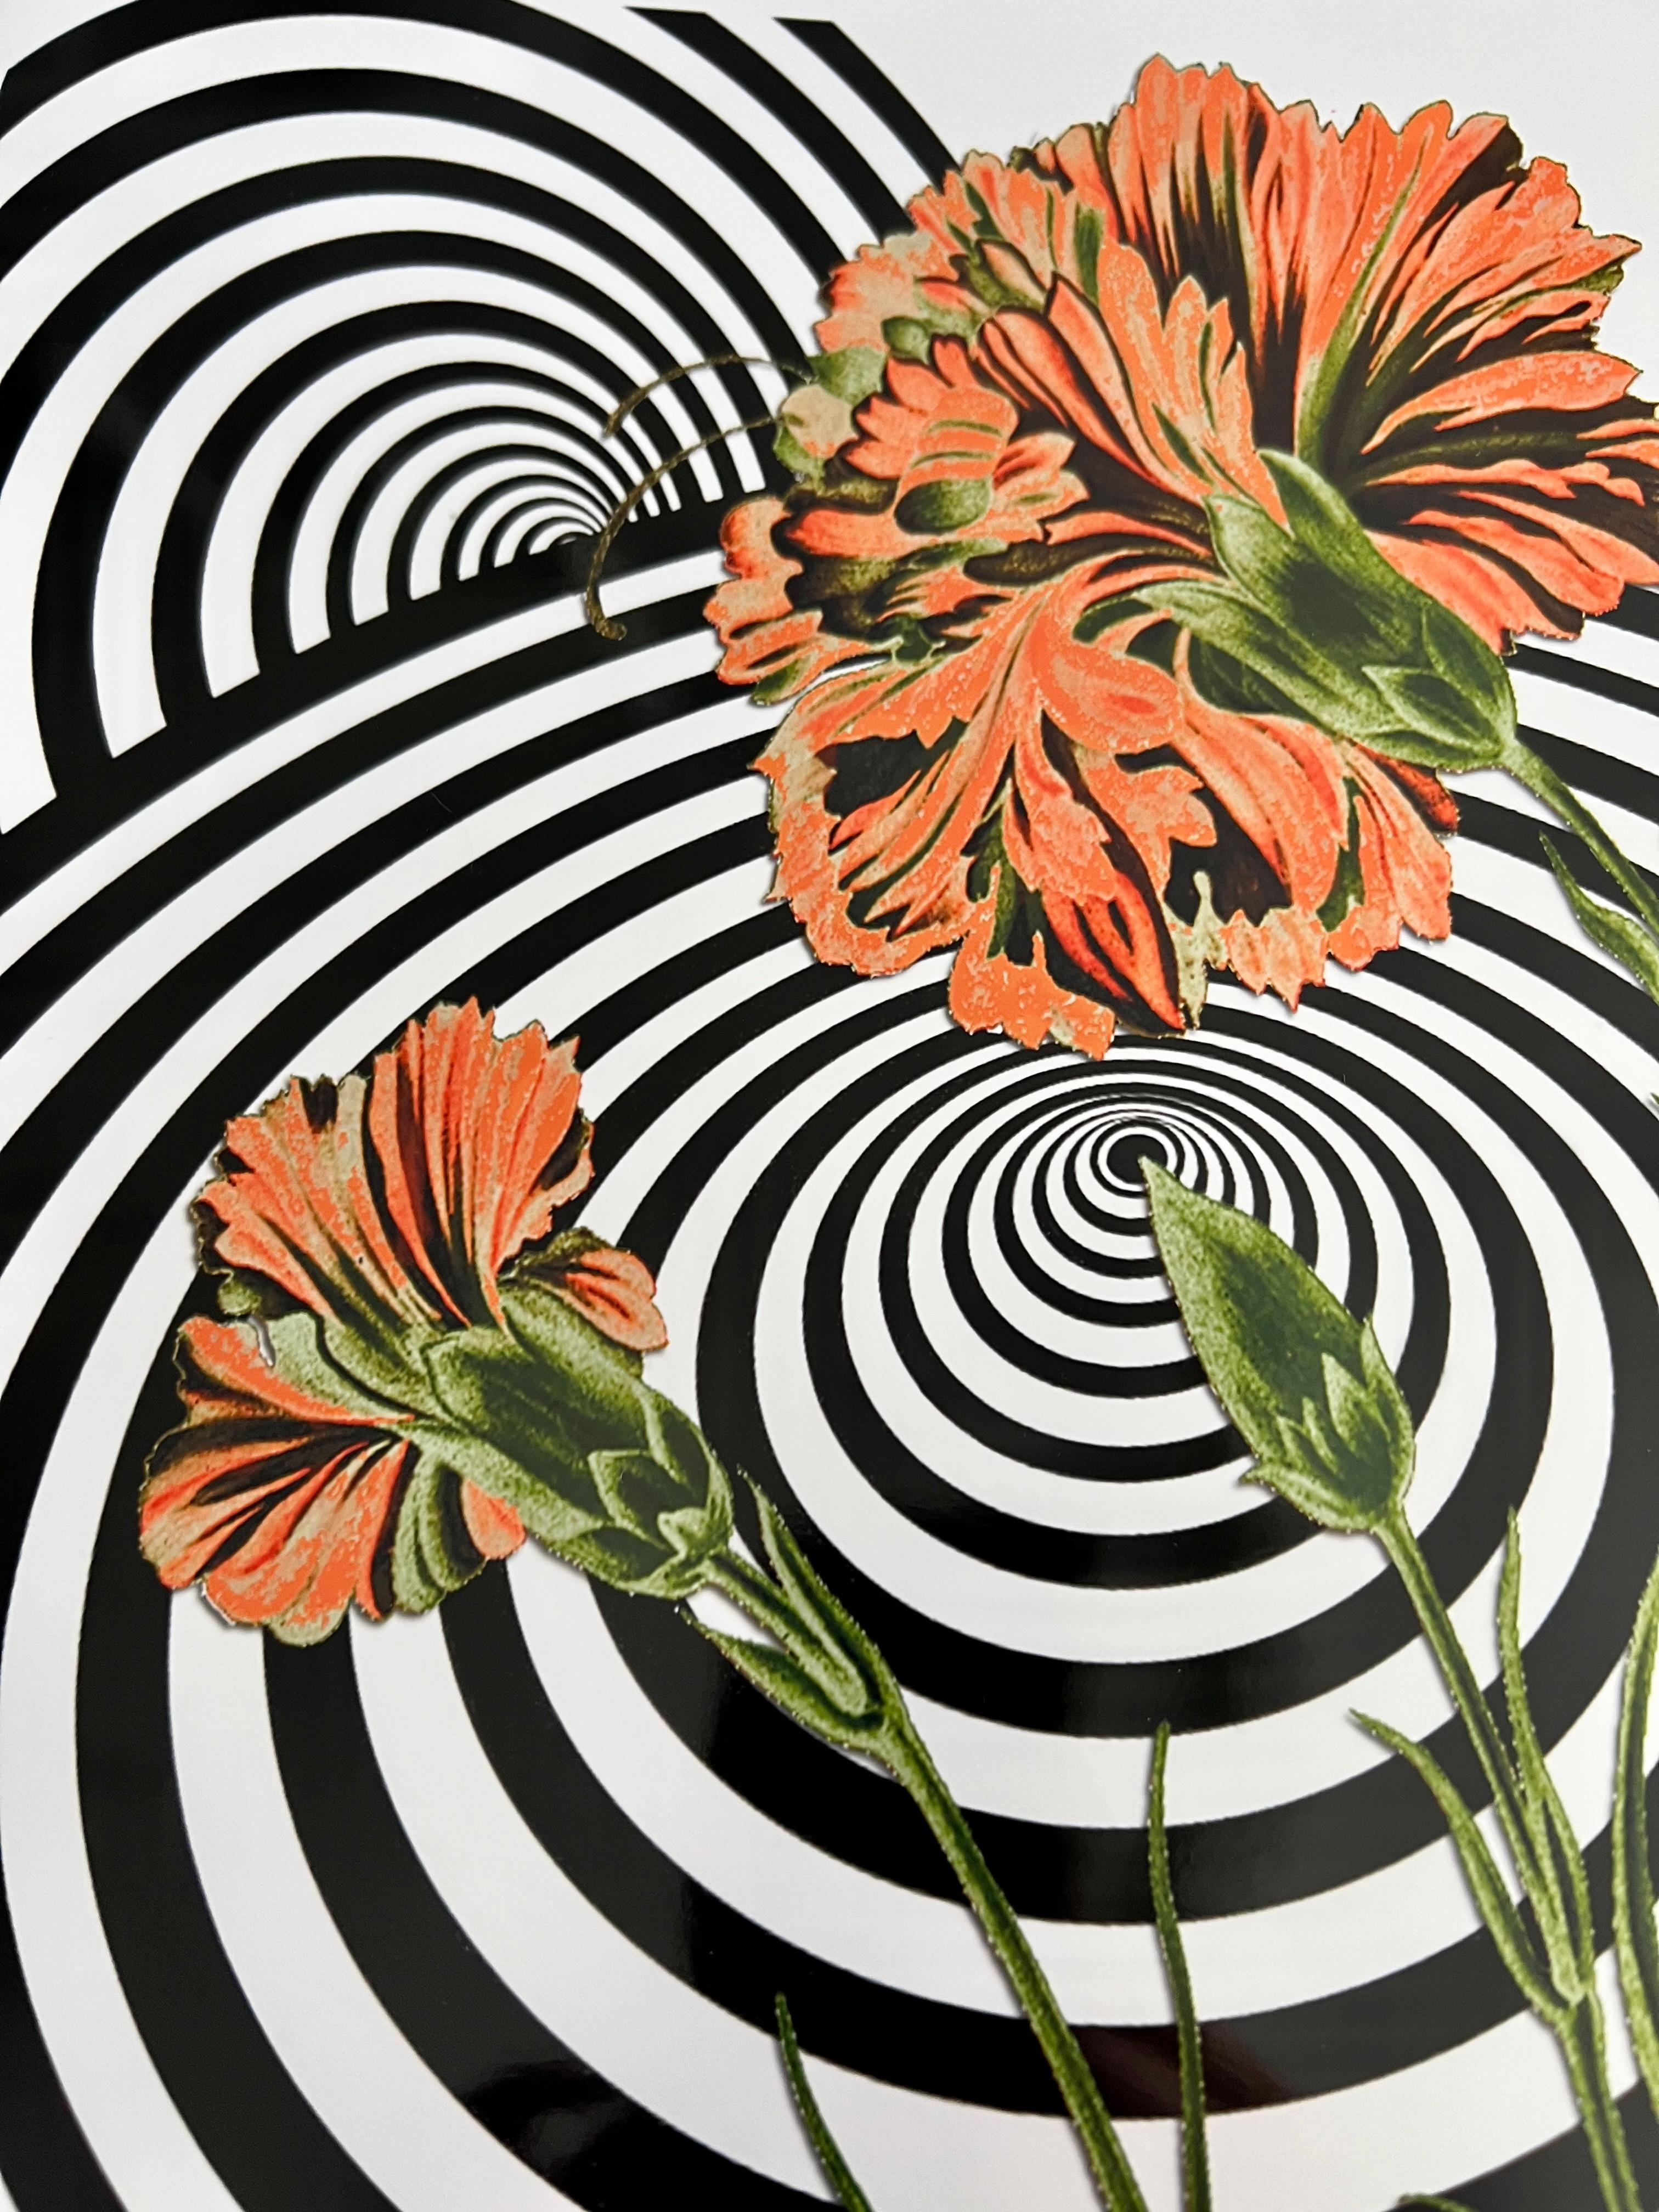 Carnation Wormhole (Cut-out, Collage, Black & White, Patterns, Negative Space) - Contemporary Print by Louise Marler